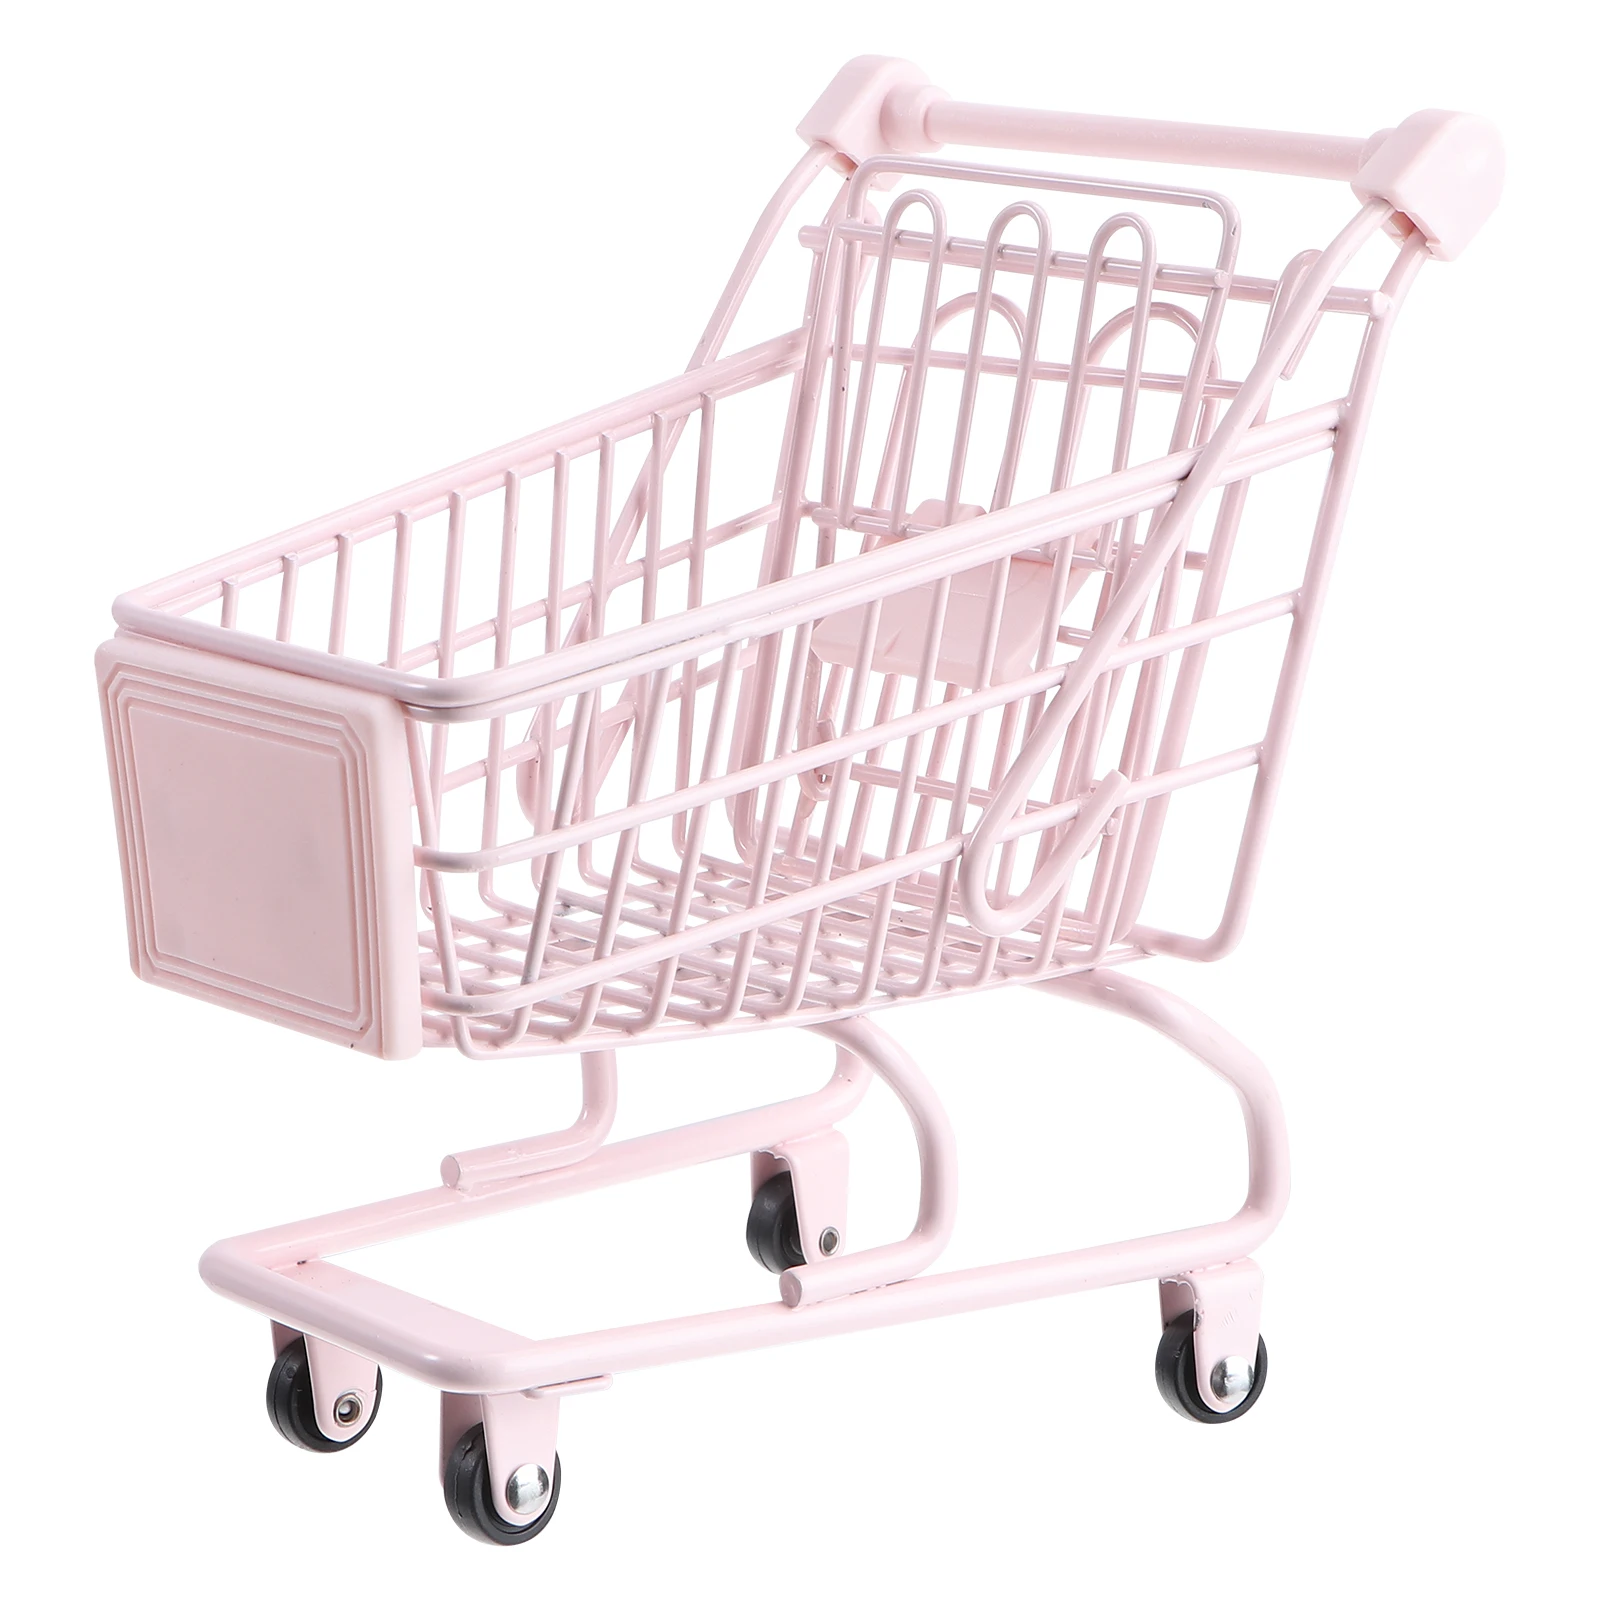 Mini Emulational Iron Trolley Grocery Basket Shopping Cart Rolling With Wheels B 